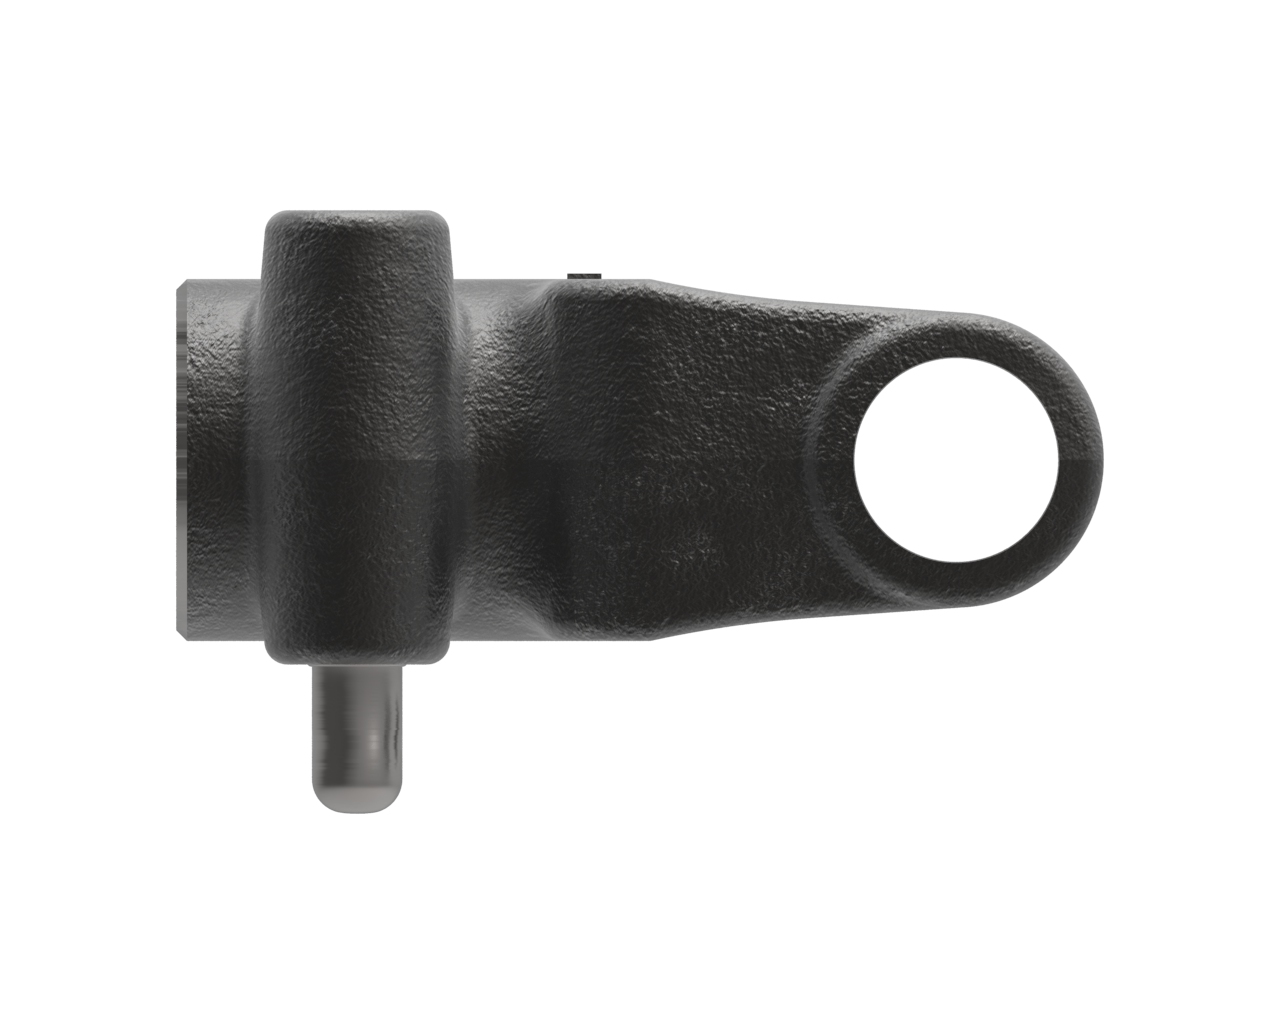 Weasler 36 in. BYPY 4 Series Metric Driveline with Friction Clutch Yoke at  Tractor Supply Co.